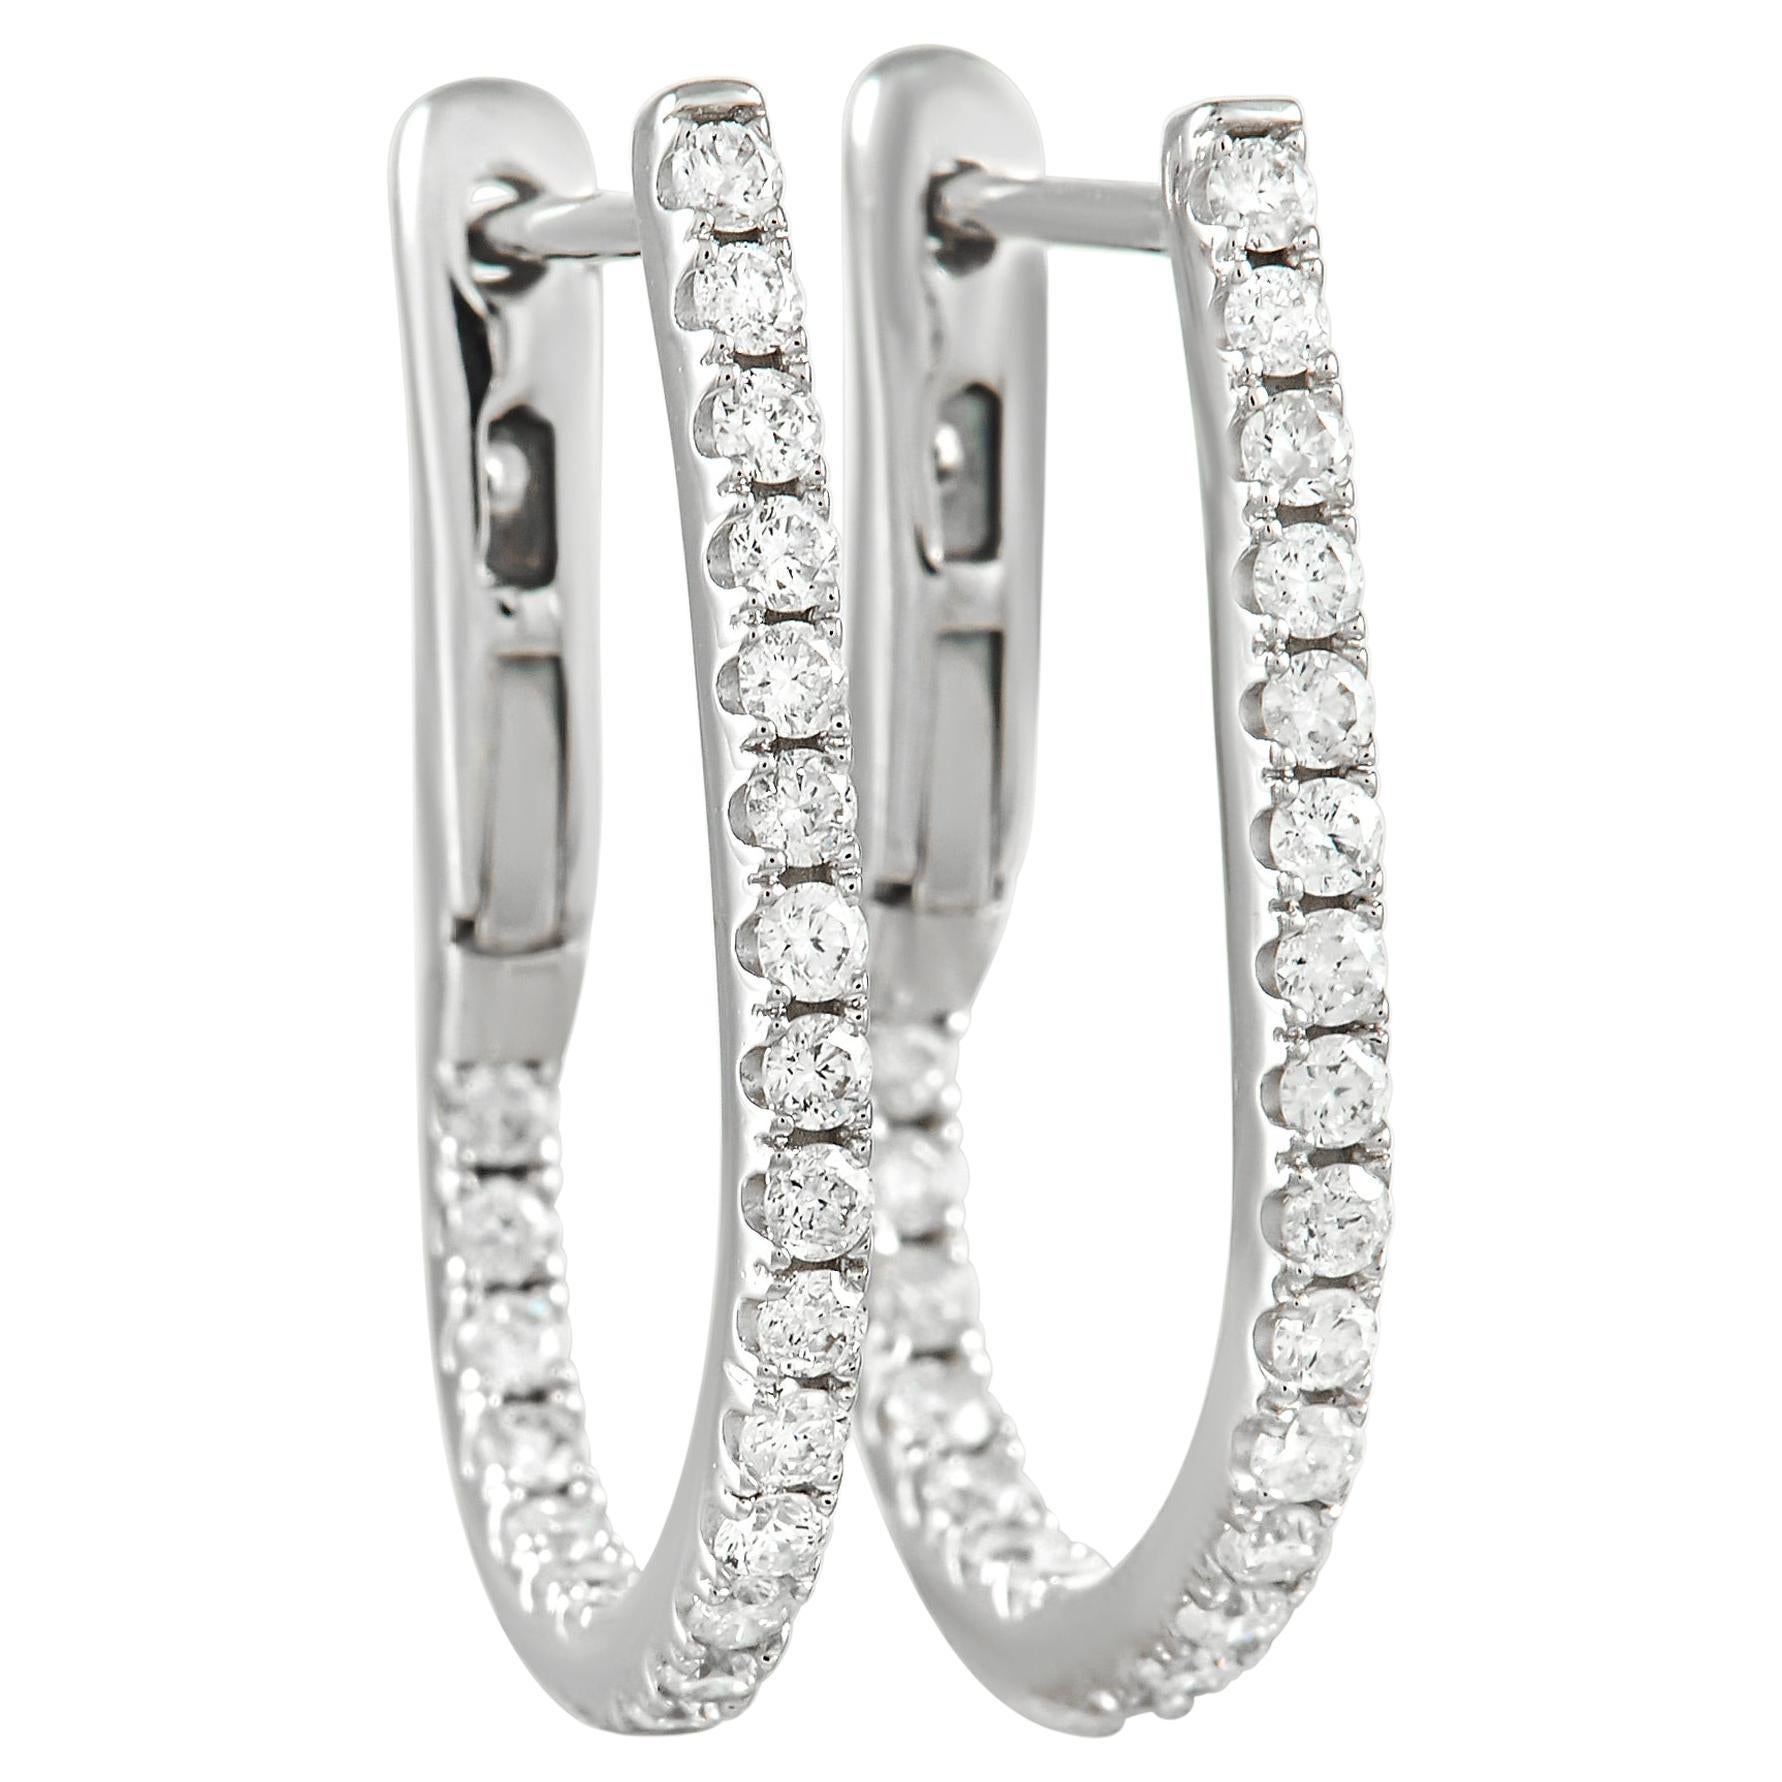 LB Exclusive 14K White Gold 0.51 Ct Diamond Inside Out Oval Hoop Earrings